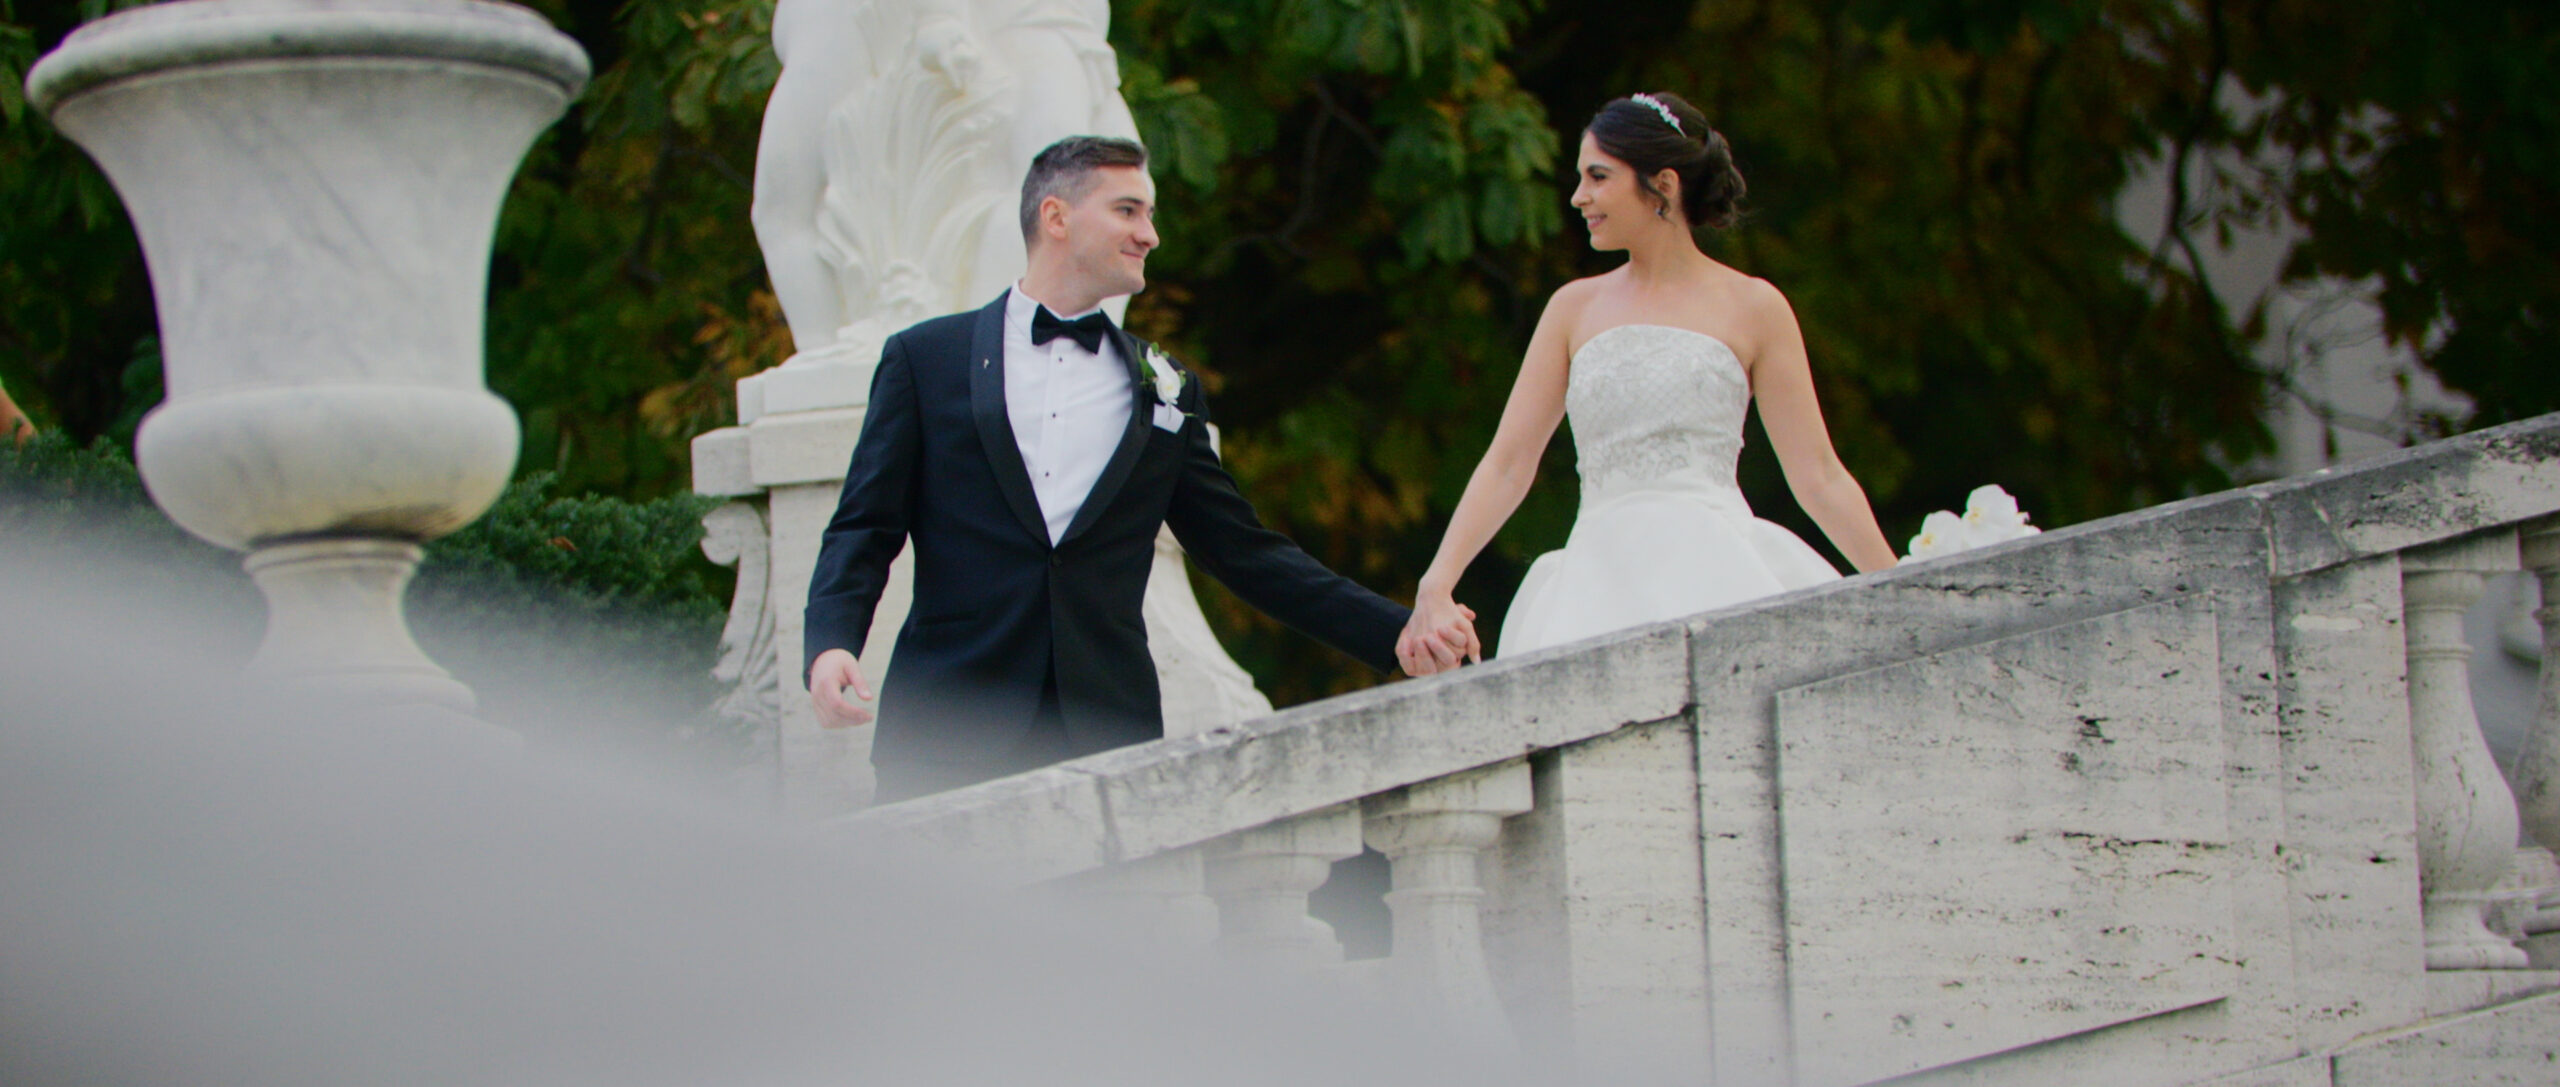 This Hotel duPont wedding video had their portraits taken at Neumors Gardens in Wilmington, DE